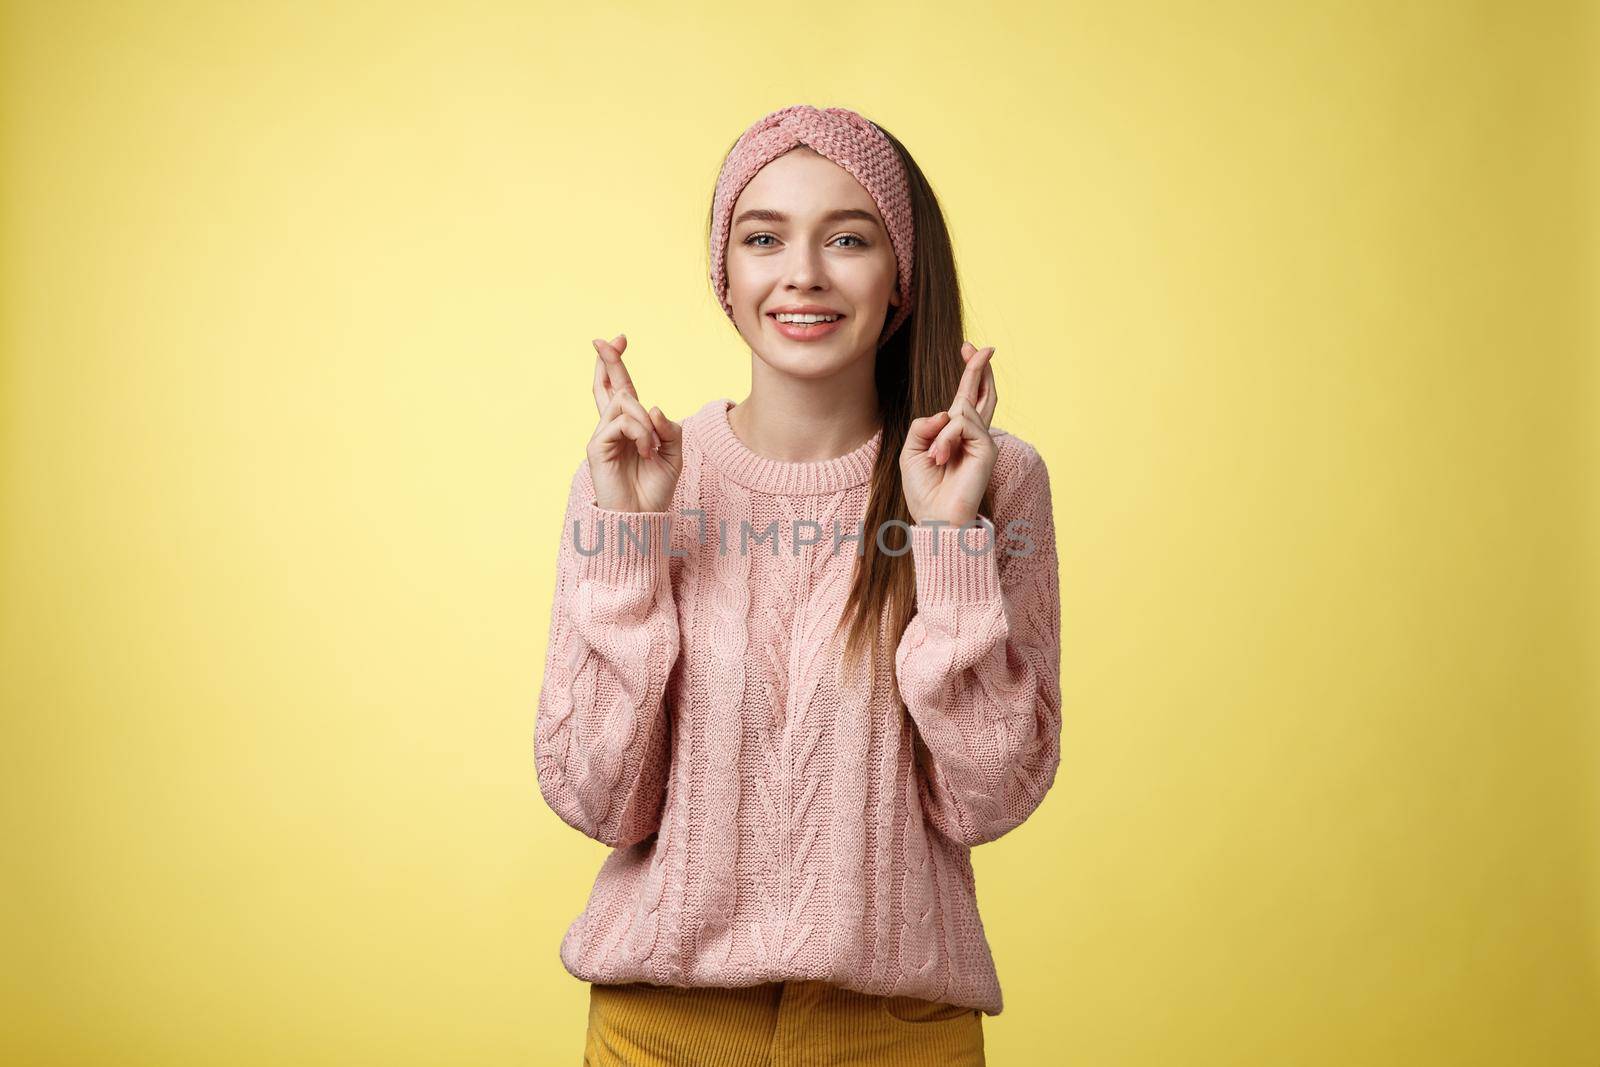 Cross my fingers for you. Supportive cute young european girlfriend wearing sweater, glamour headband making luck, wish gesture smiling hopeful having faith dream come true over yellow background.